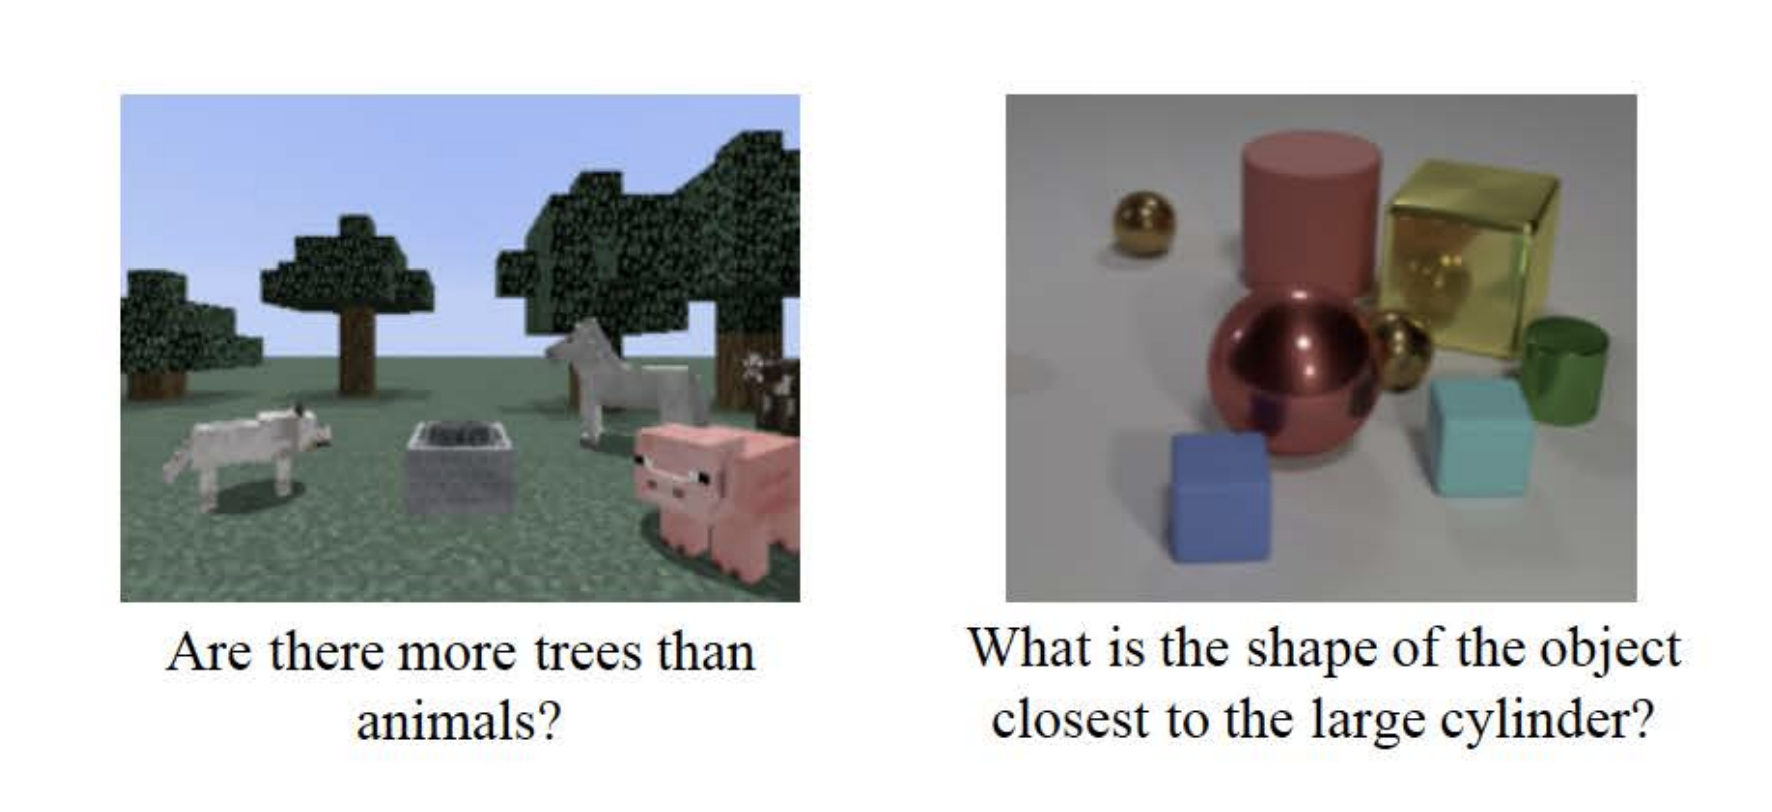 An image composed of two images. The left image is a screenshot from a popular game titled Minecraft where there are several trees and animals as well as a metal cart. Under the image there is text that says “Are there more trees than animals?”.  The right image consists of eight solid objects on a white surface. The objects are varied in terms of size, shape, and material. Text under the image asks “What is the shape of the object closest to the large cylinder?”.